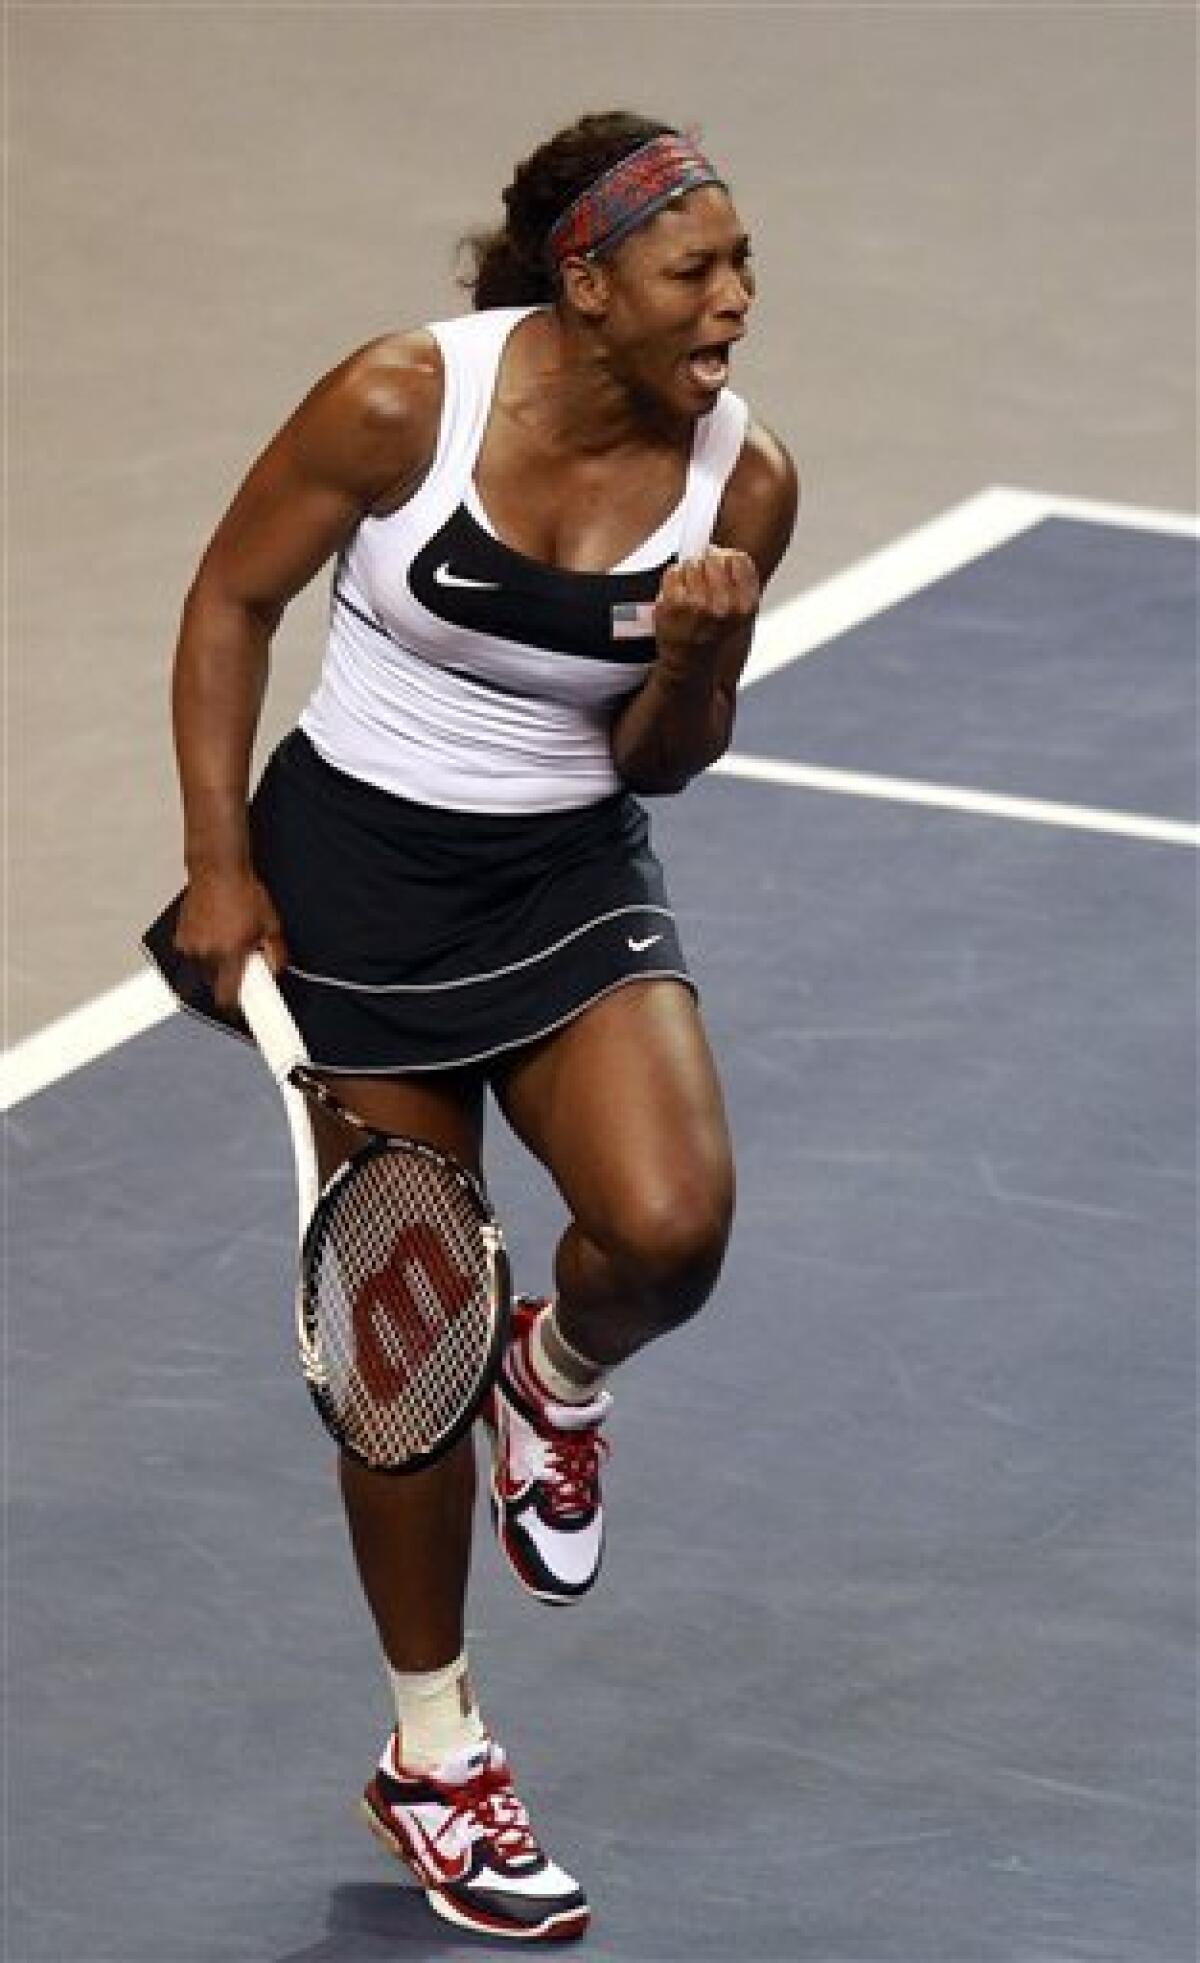 Serena Williams reacts to scoring in the third set of a first-round Fed Cup tennis match against Anastasia Yakimova, of Belarus, in Worcester, Mass., Sunday, Feb. 5, 2012. Williams defeated Yakimova 5-7, 6-1, 6-1. (AP Photo/Steven Senne)